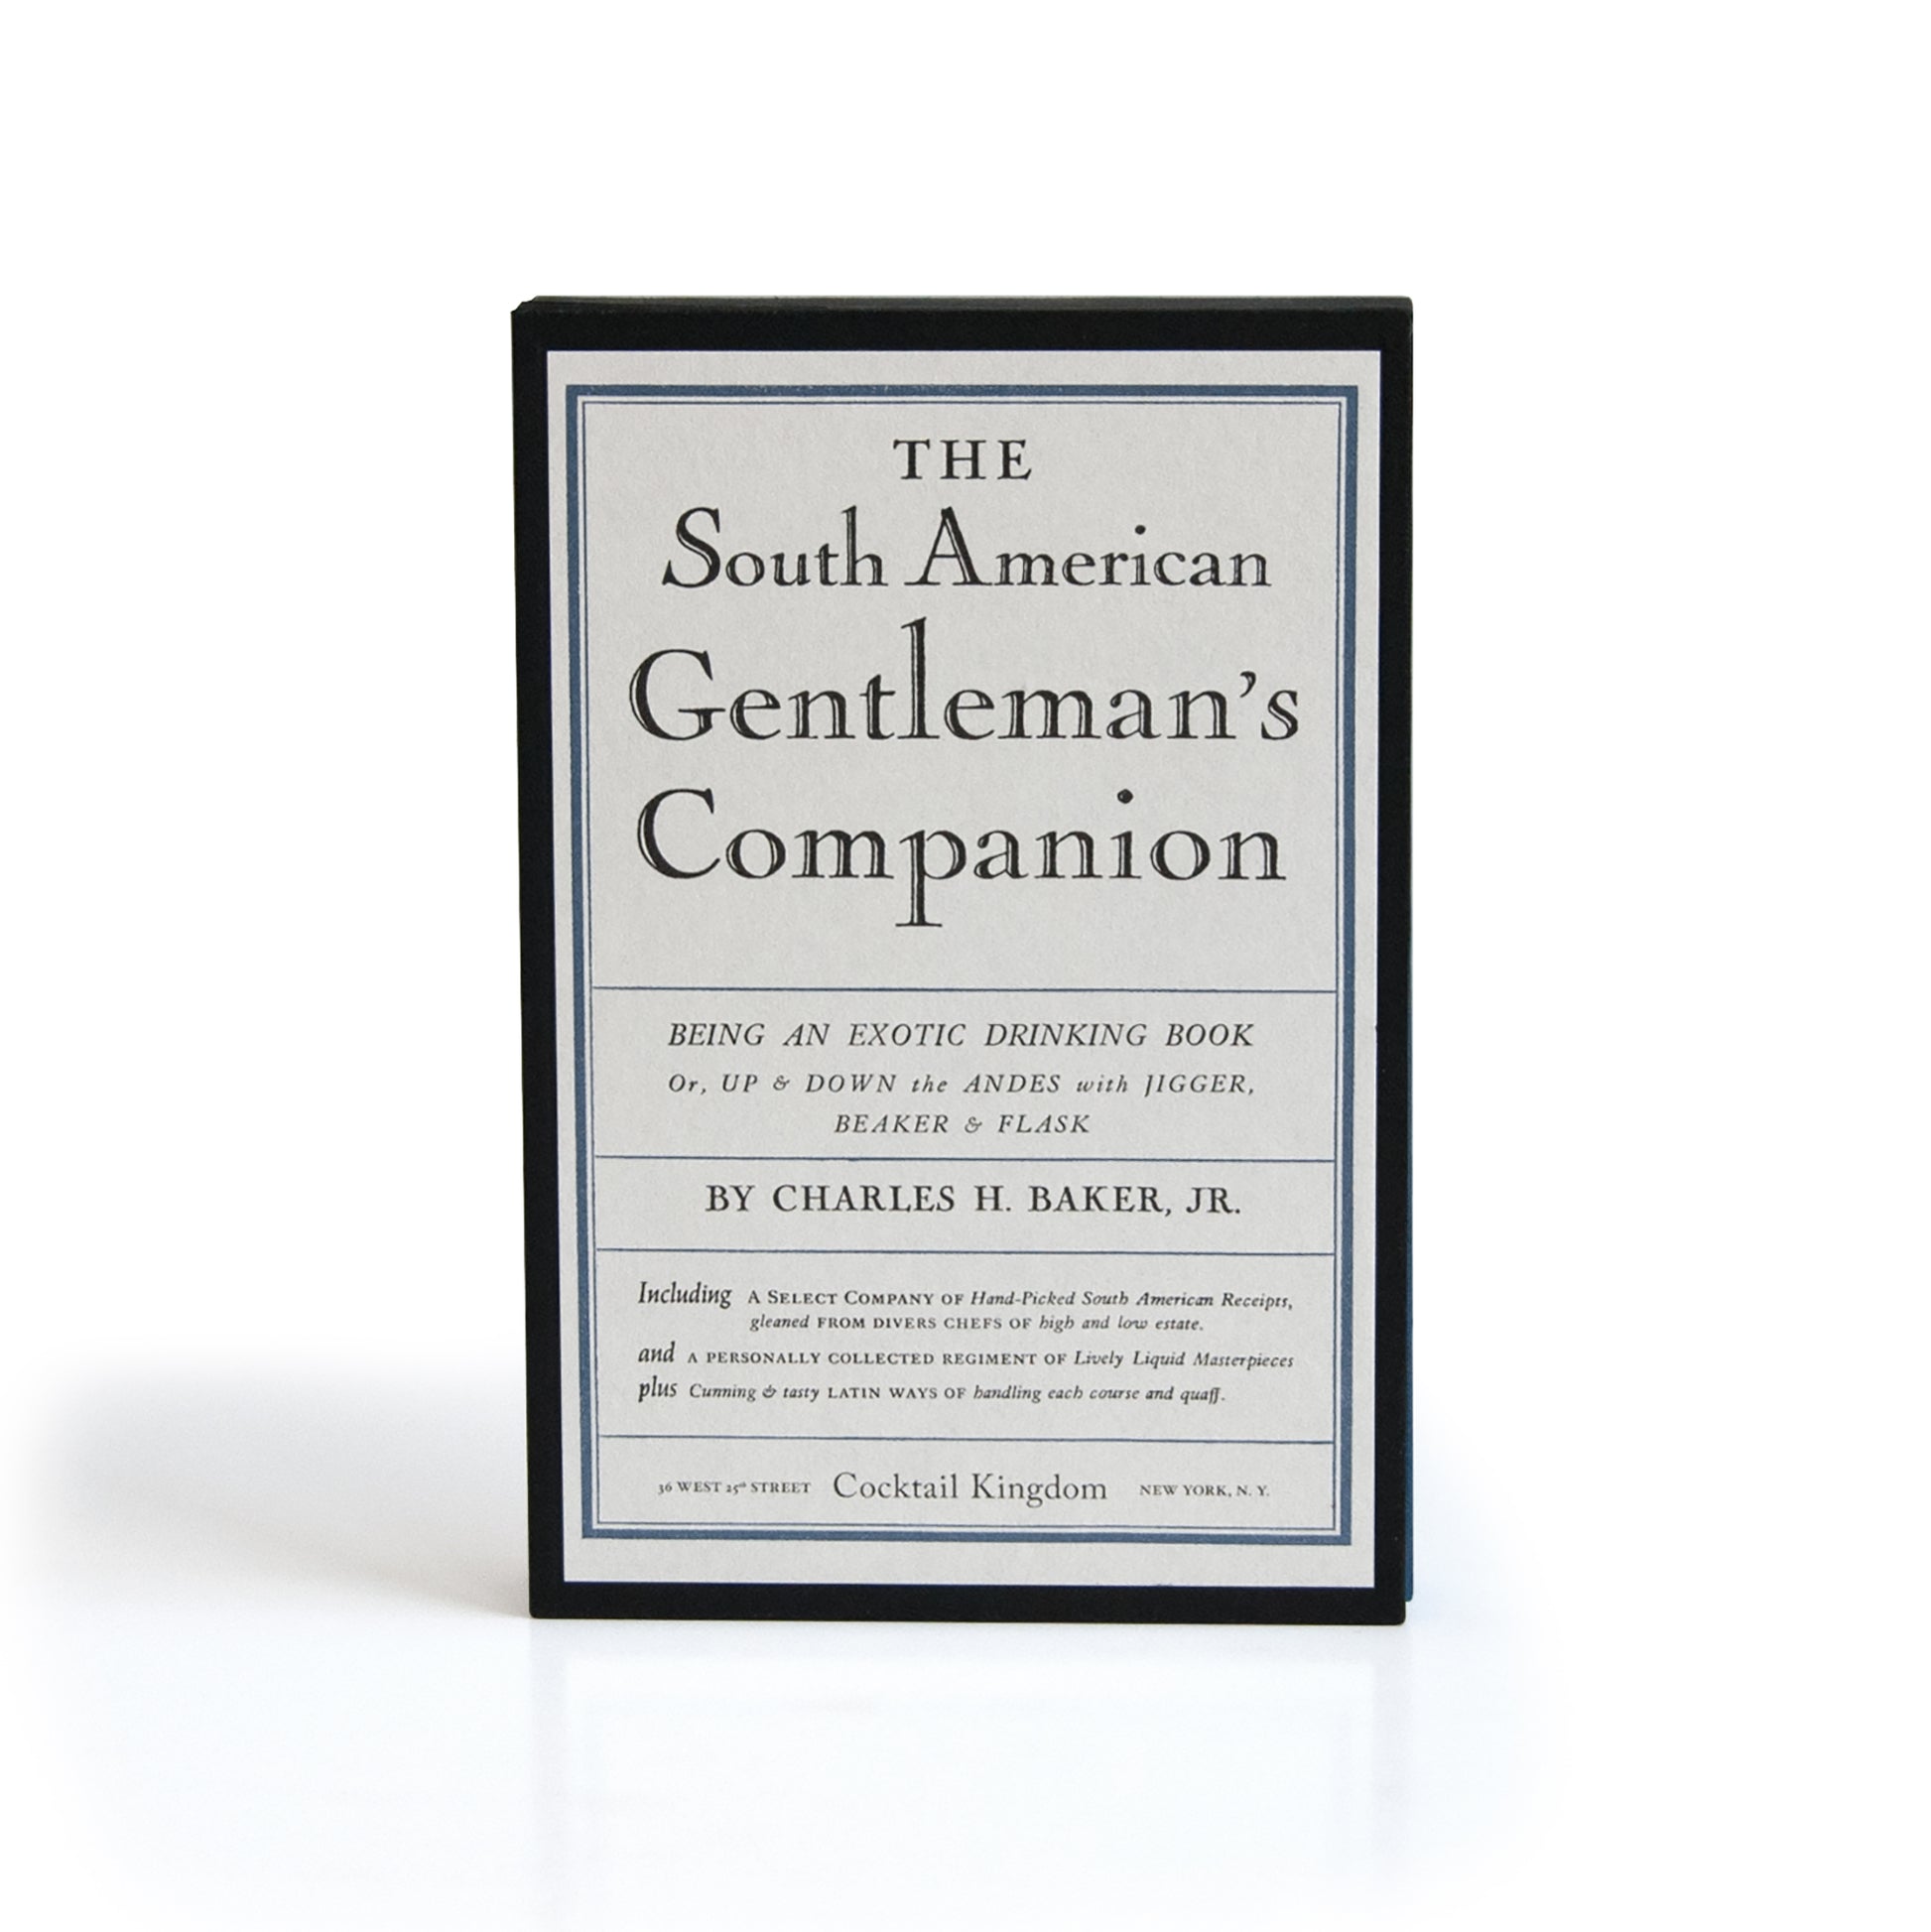 THE SOUTH AMERICAN GENTLEMAN'S COMPANION BY CHARLES H. BAKER, JR.